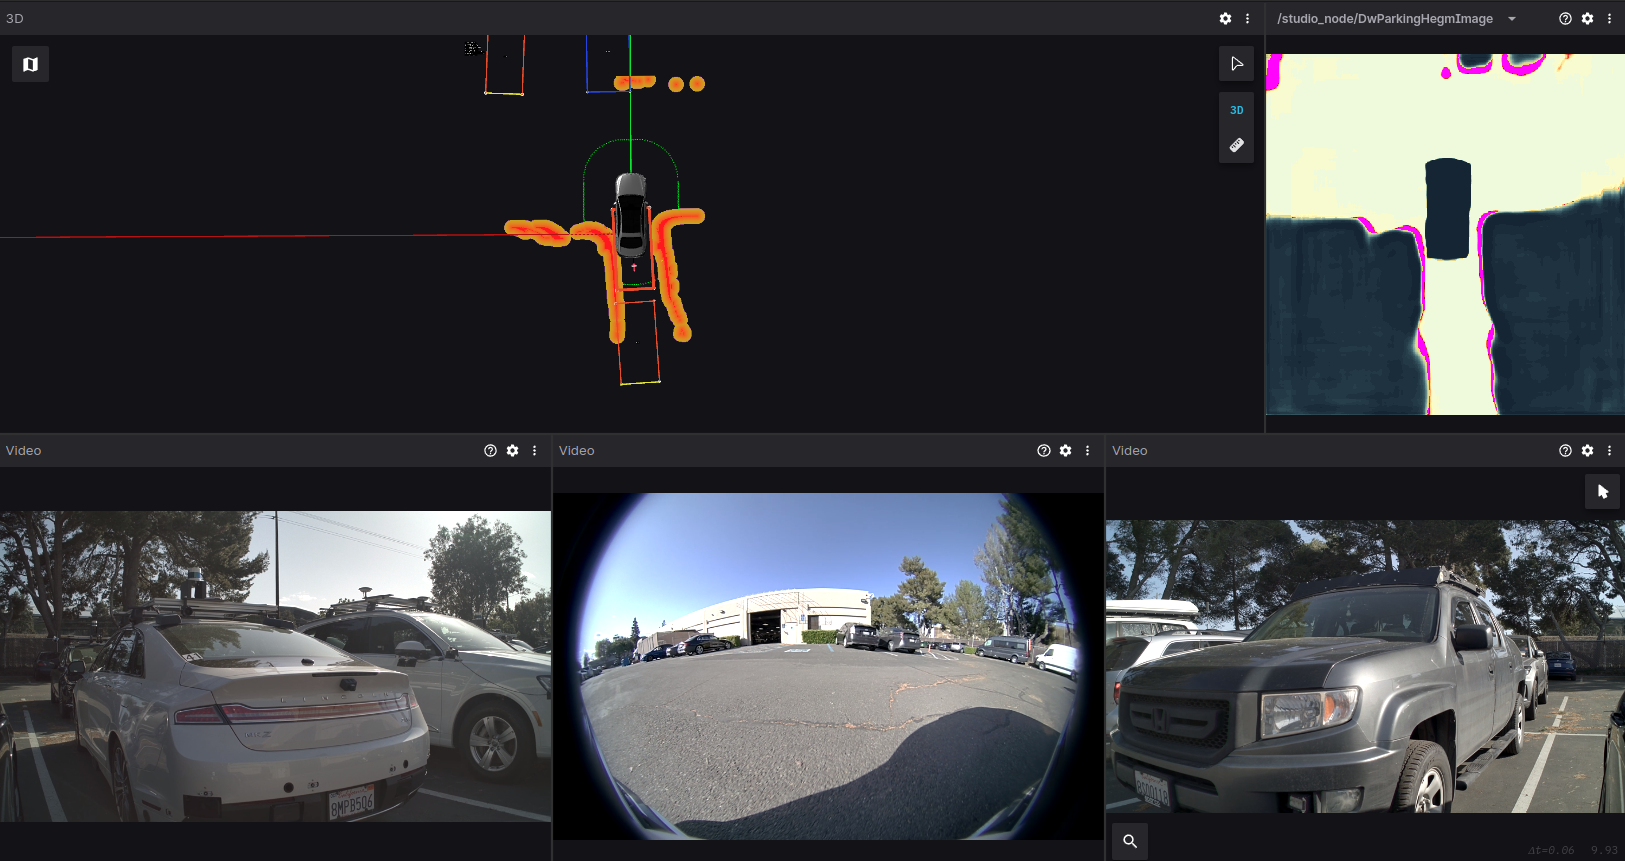 Image showing DNN output and camera views in an automatic parking process.